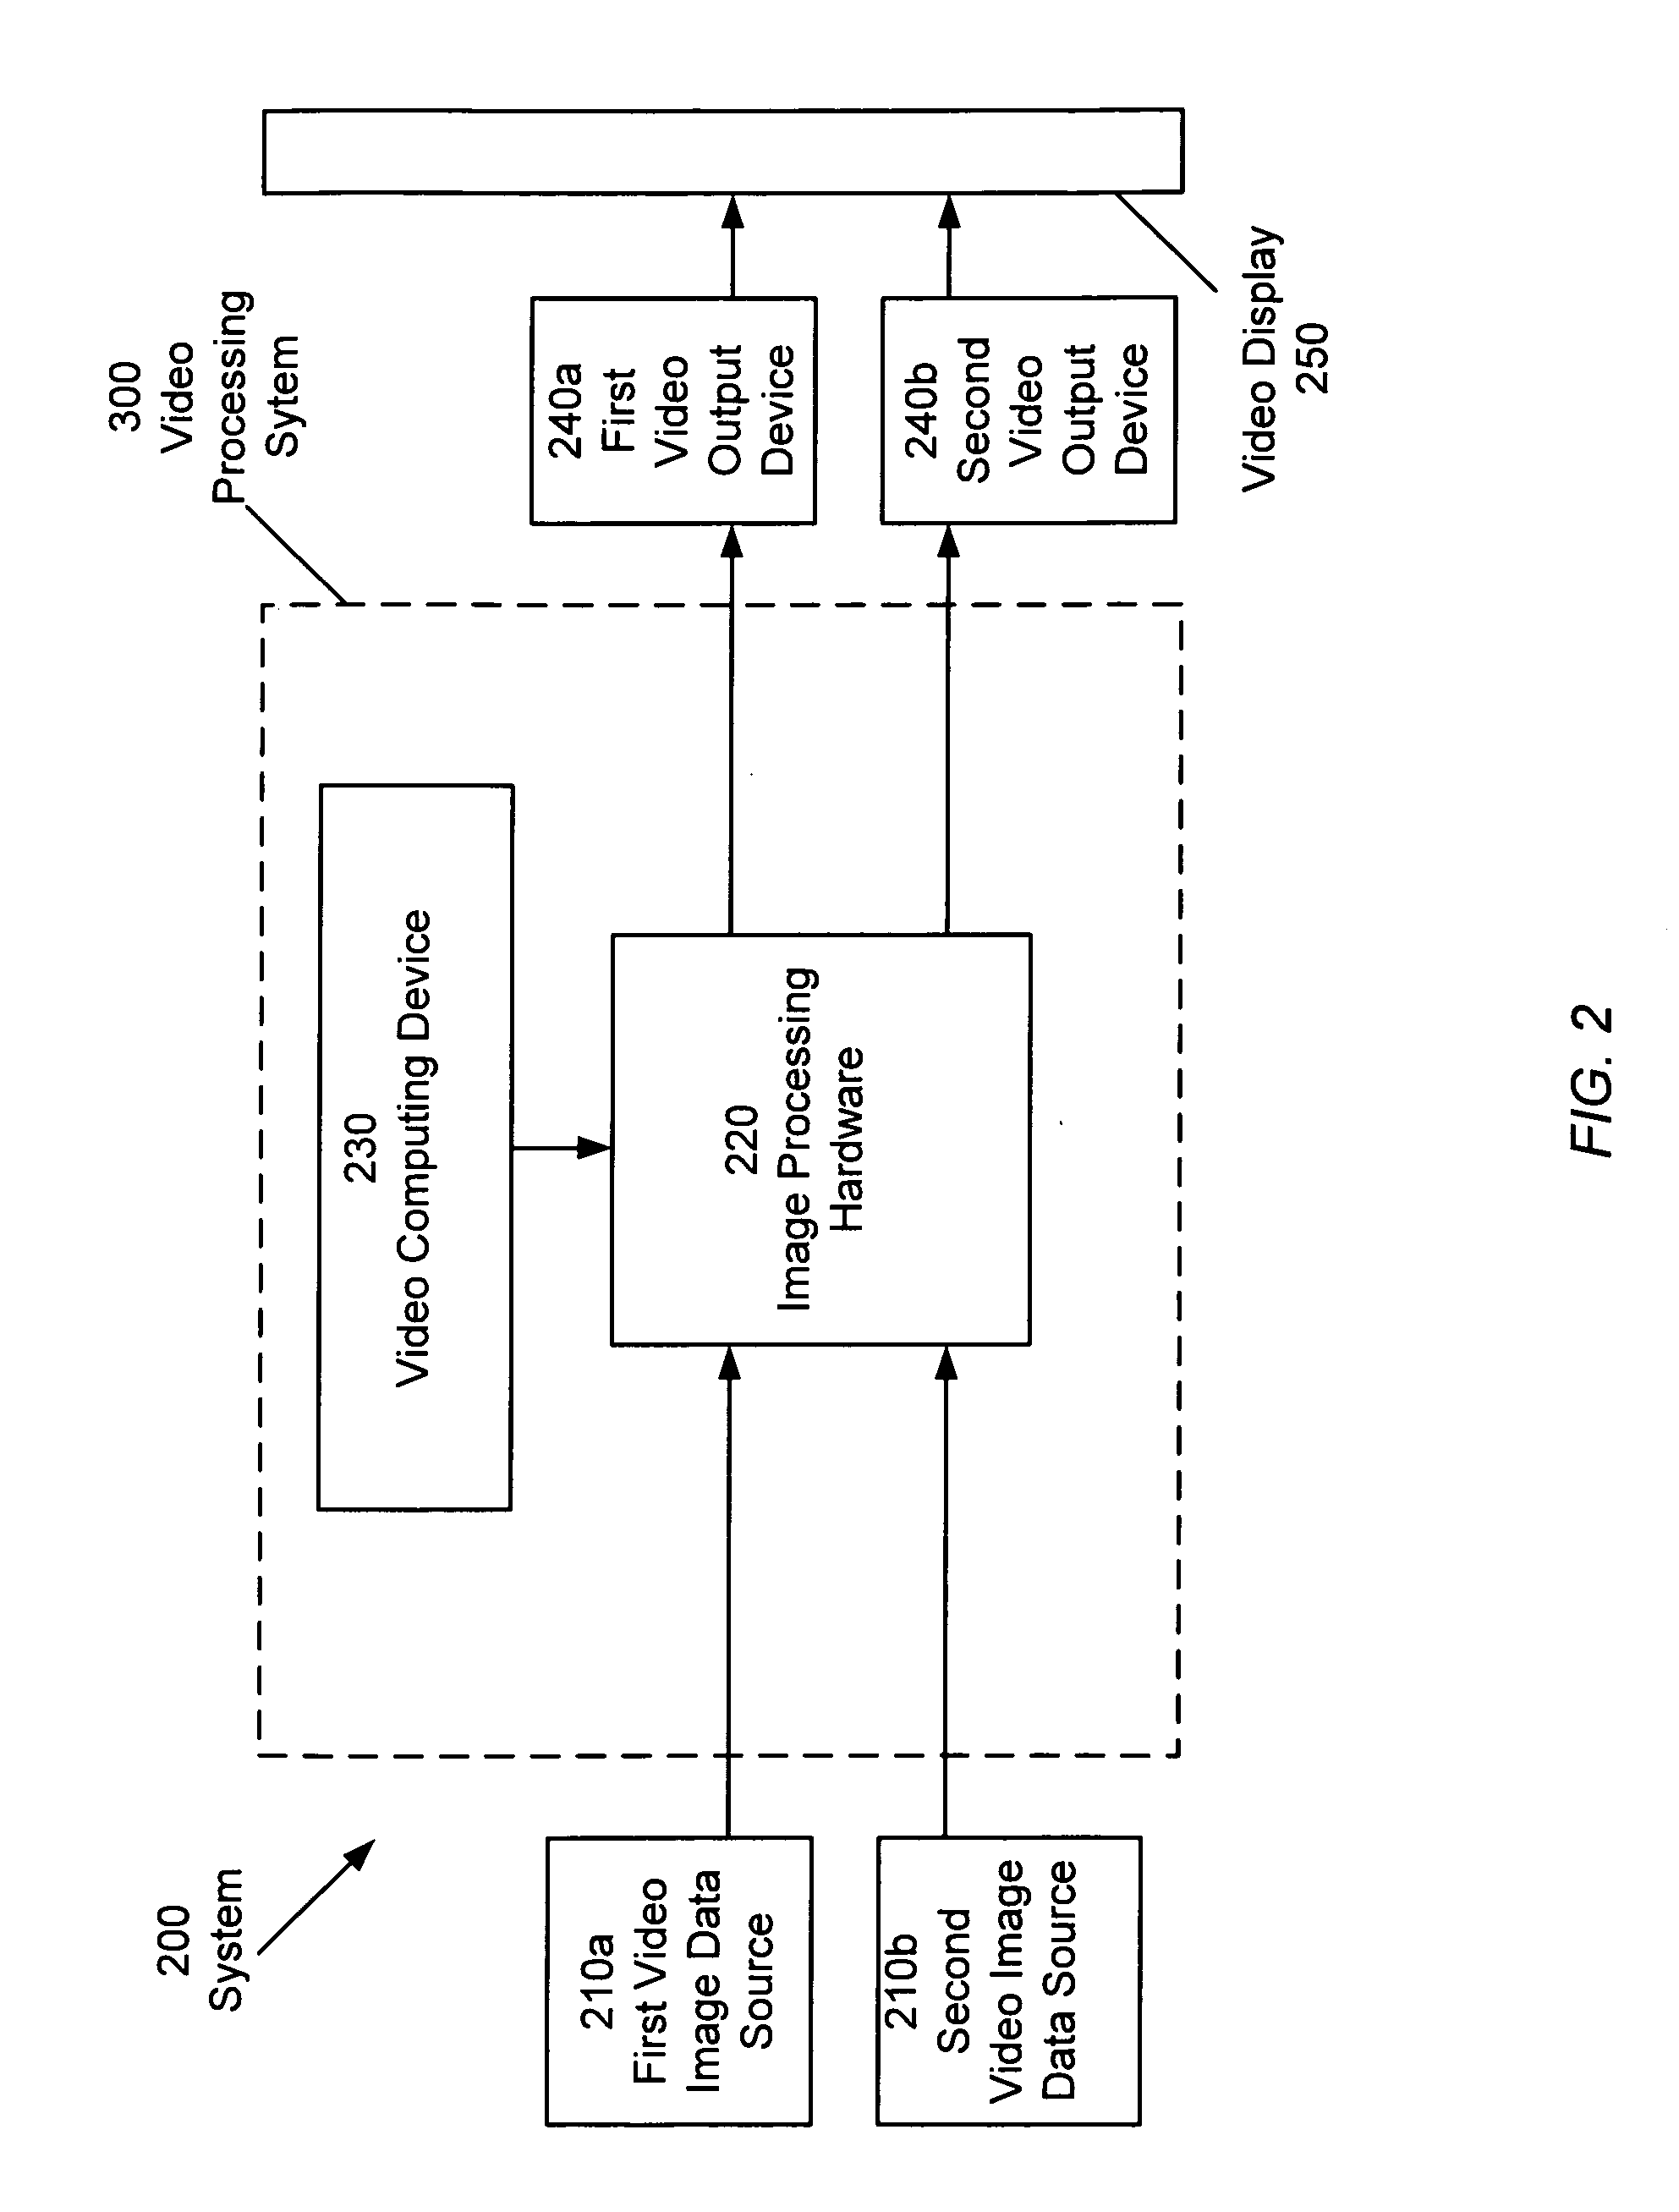 Method And System For Combining Images Generated By Separate Sources